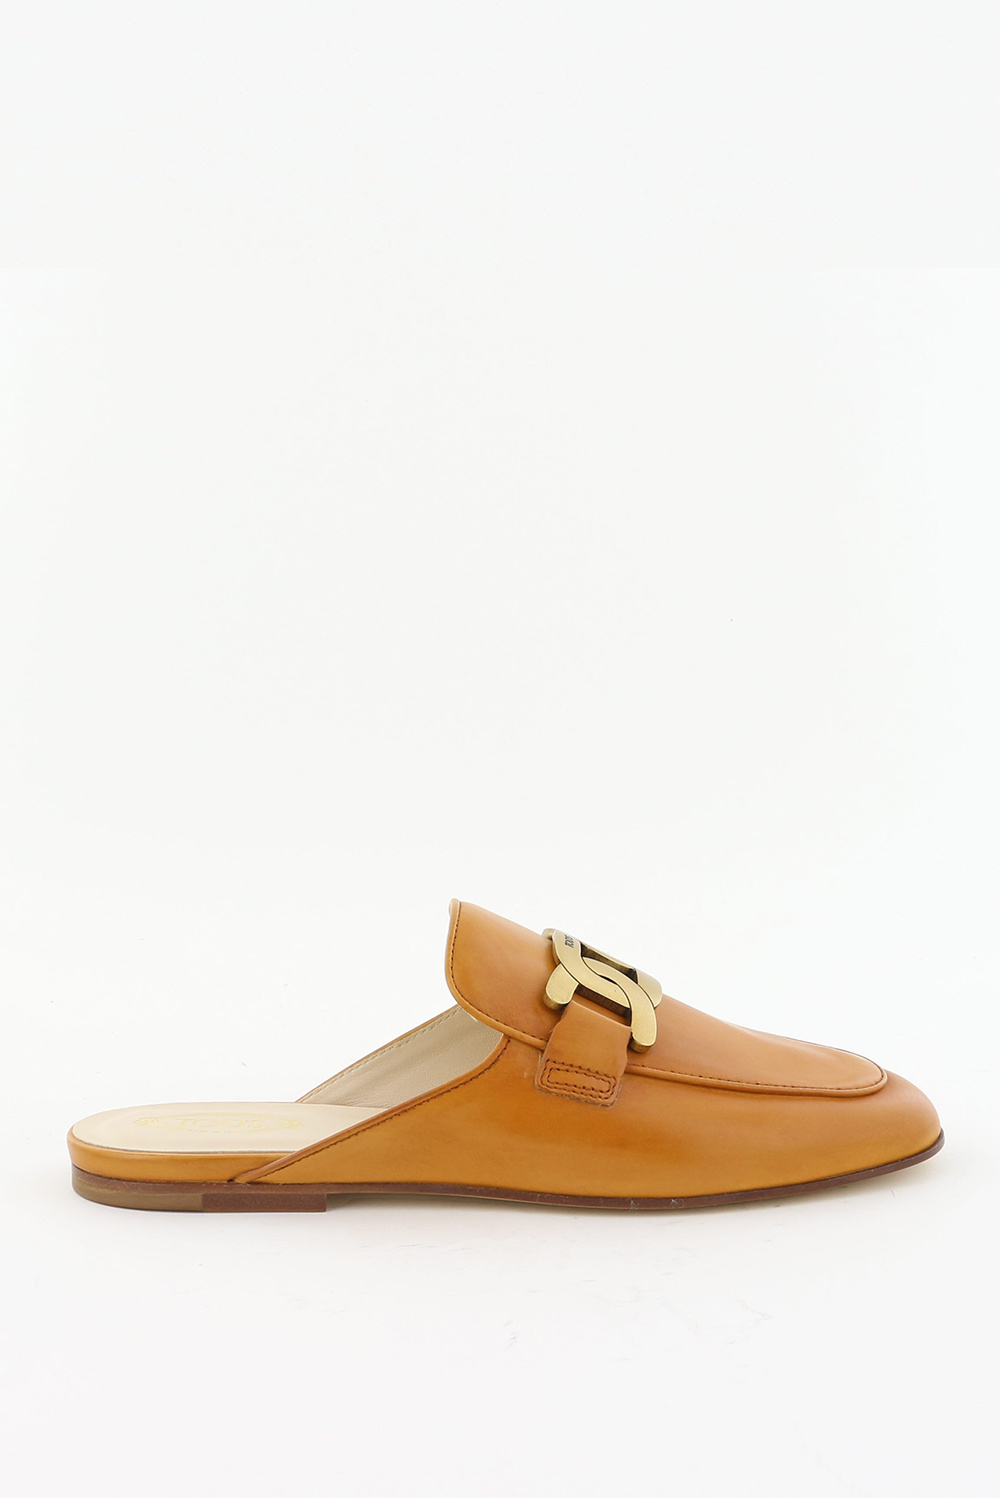 Tods loafers XXW79A0EX40N cognac